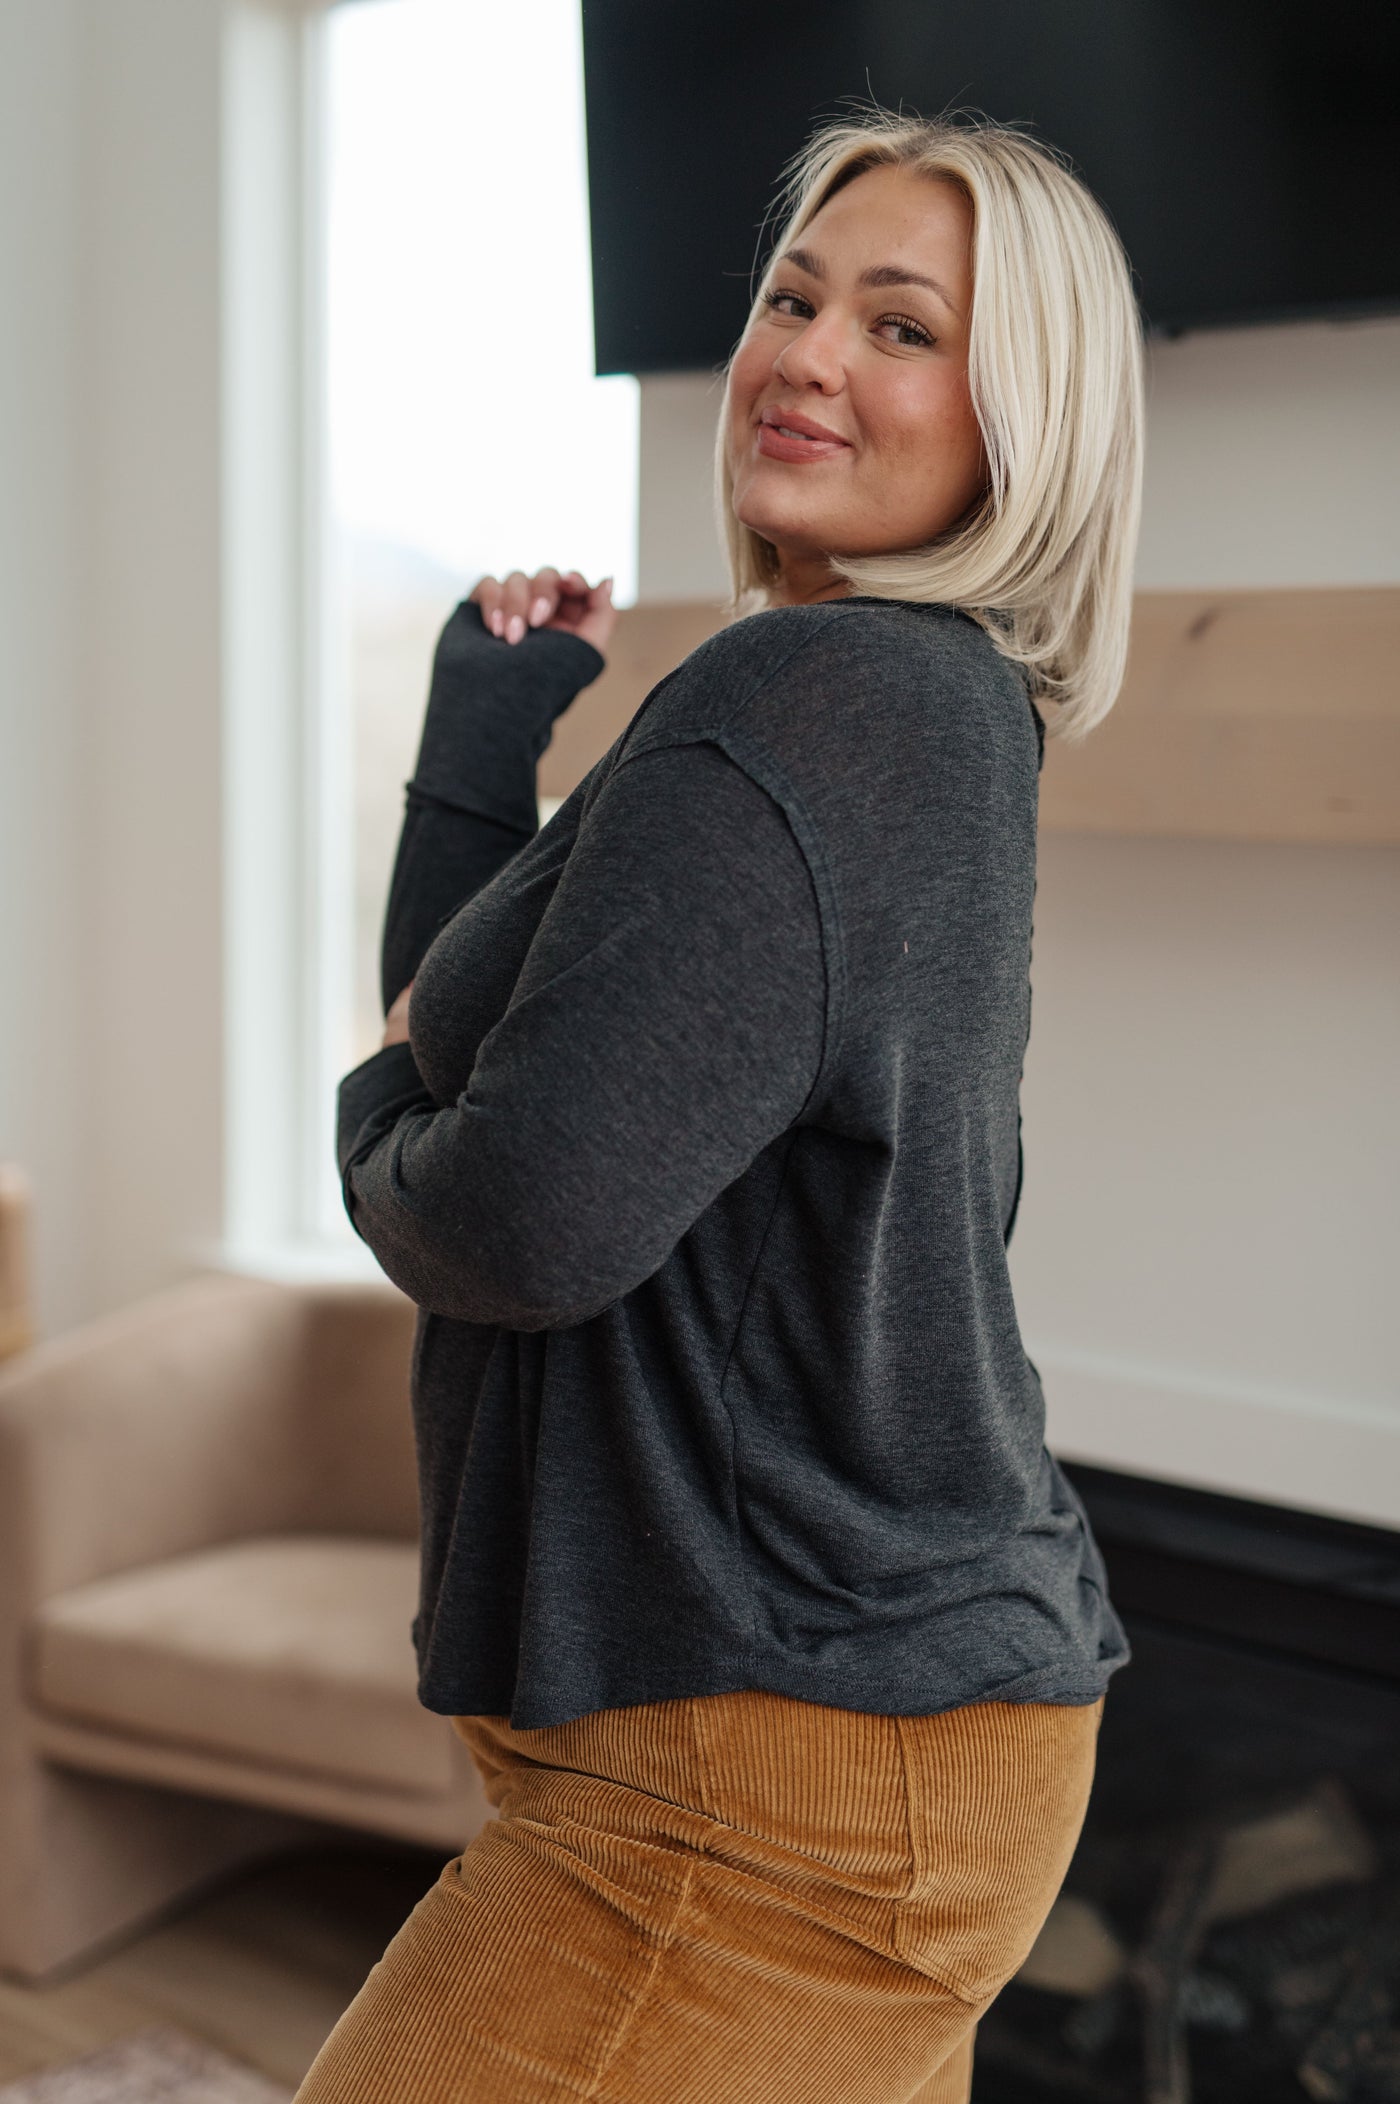 Made from a soft jersey knit, this top features exposed seams and a v-neckline that will flatter any figure. The thumb holes in the sleeve cuffs add an extra layer of warmth and style.